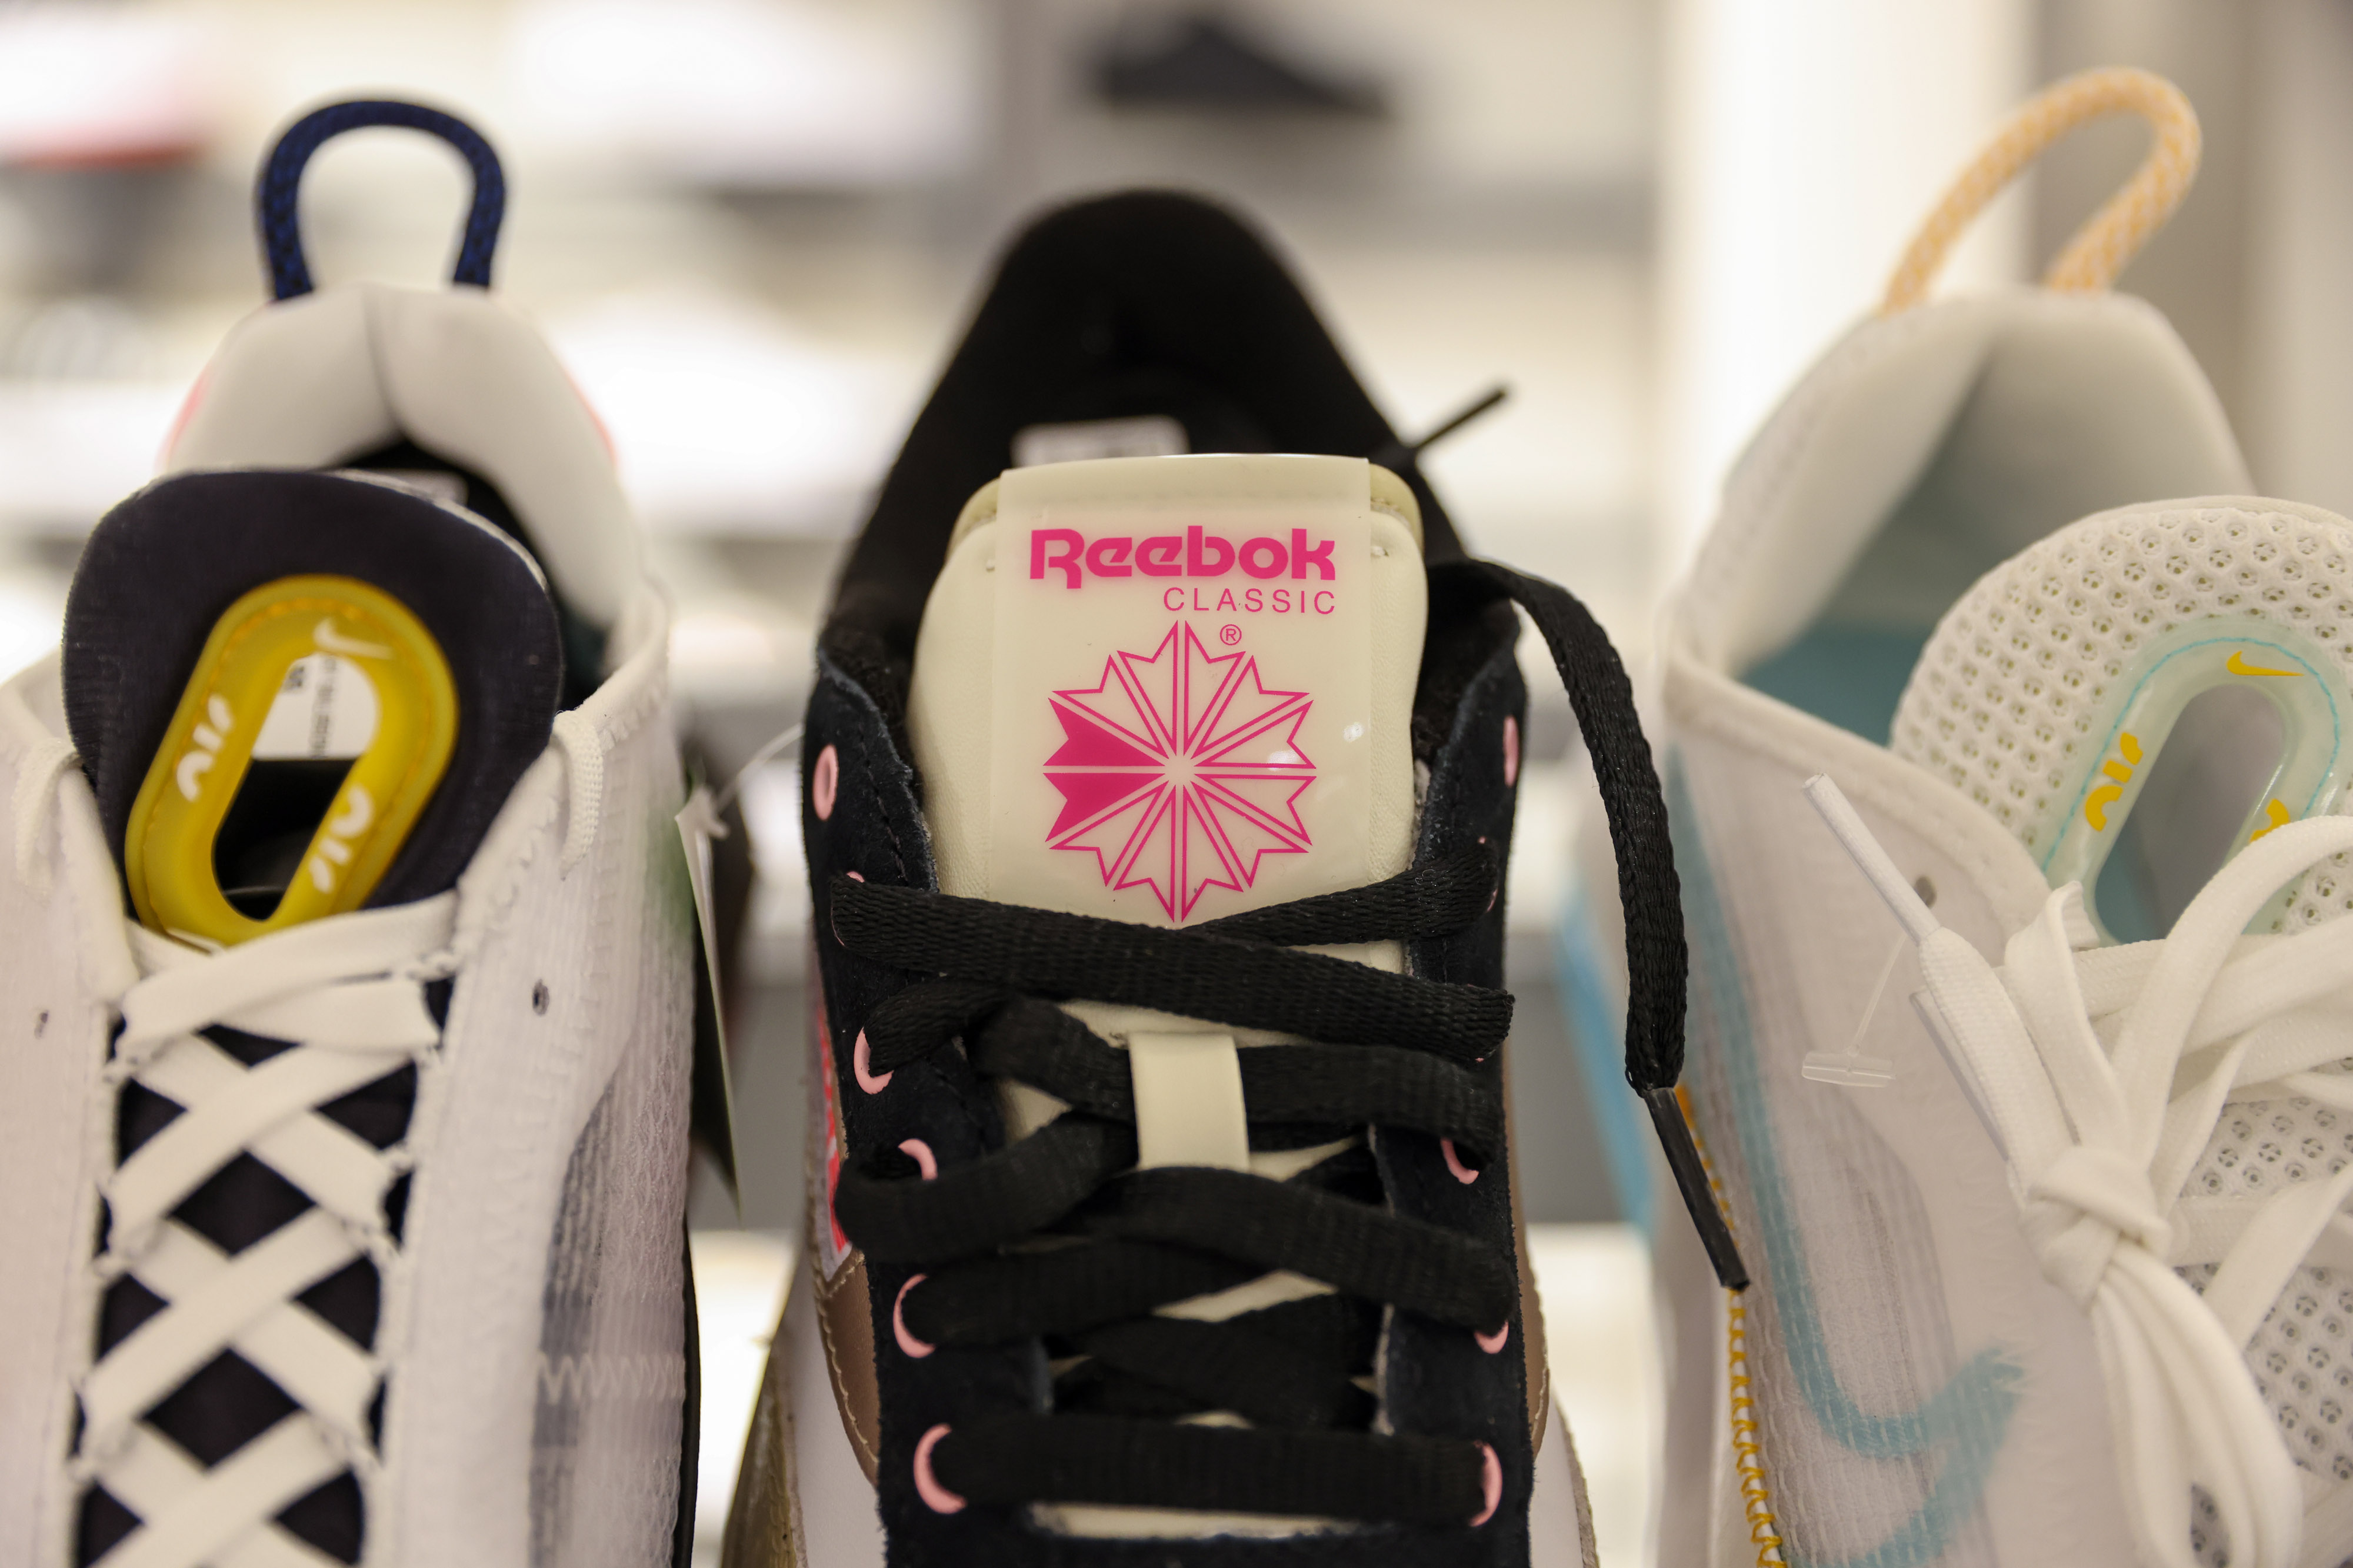 Reebok is owned by Authentic Brands